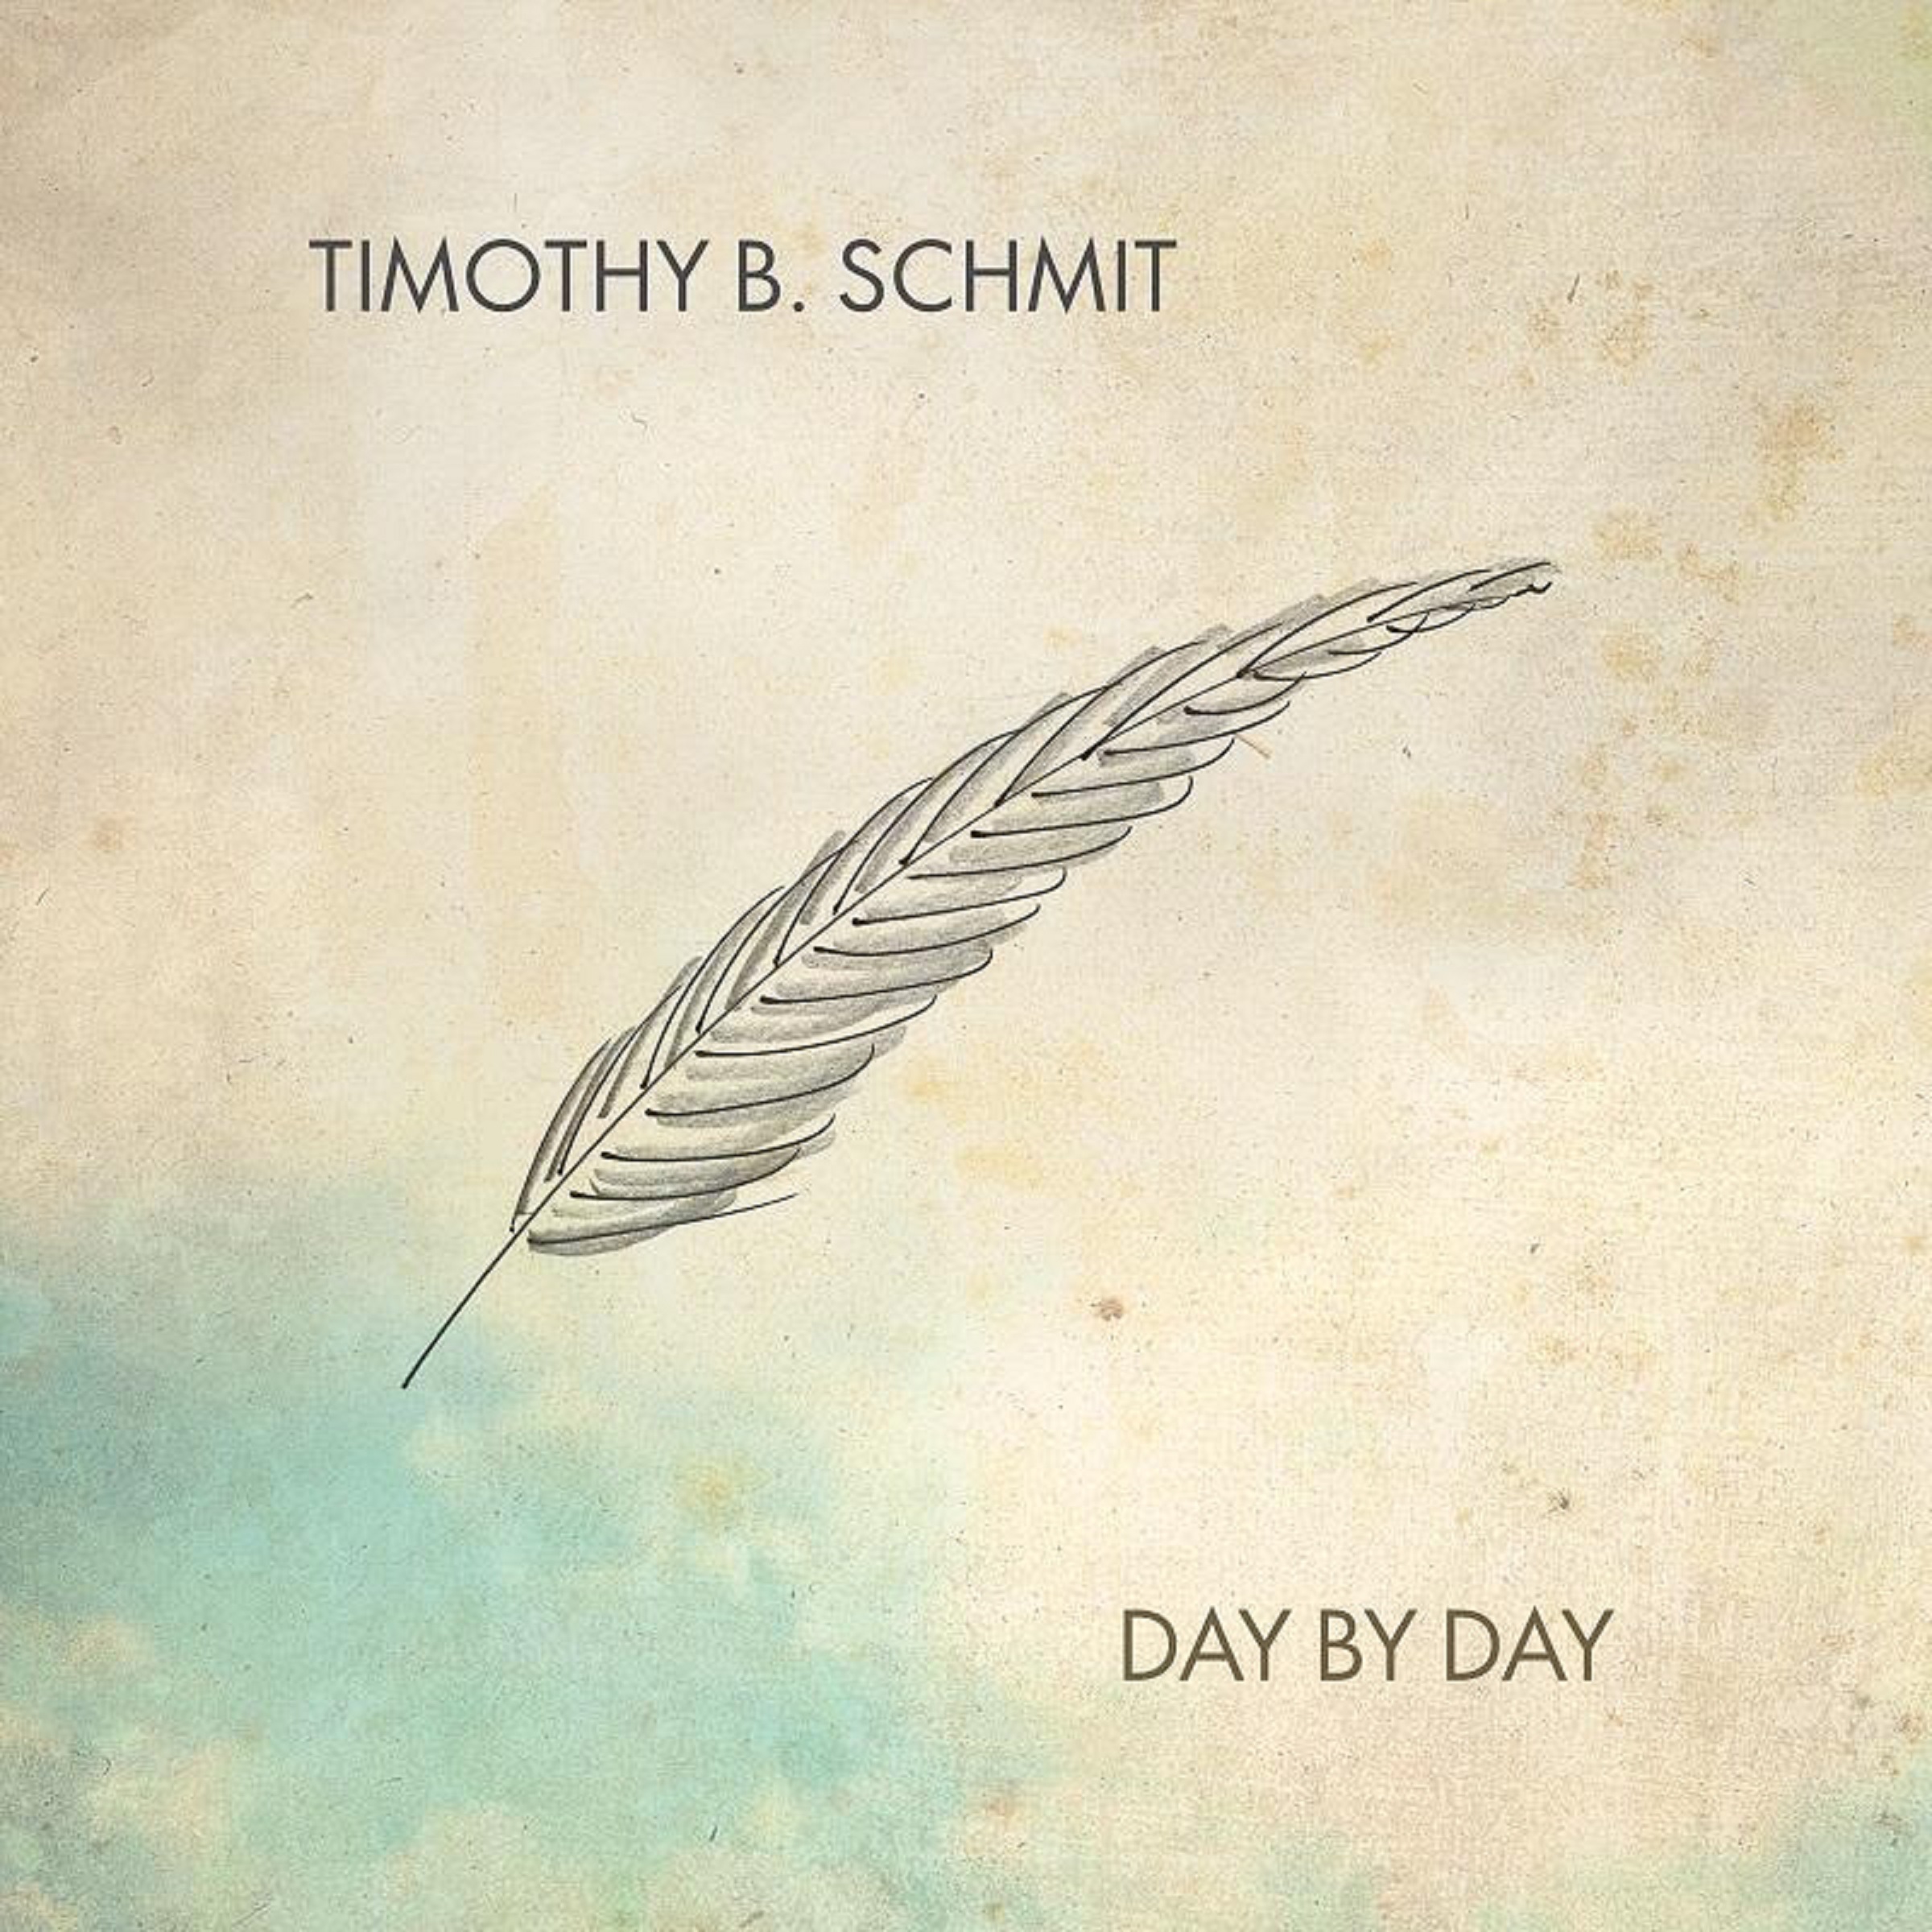 TIMOTHY B. SCHMIT Shares First Single And Video “Simple Man” Ahead Of The May 6 Release Of His Solo Album ‘Day By Day’